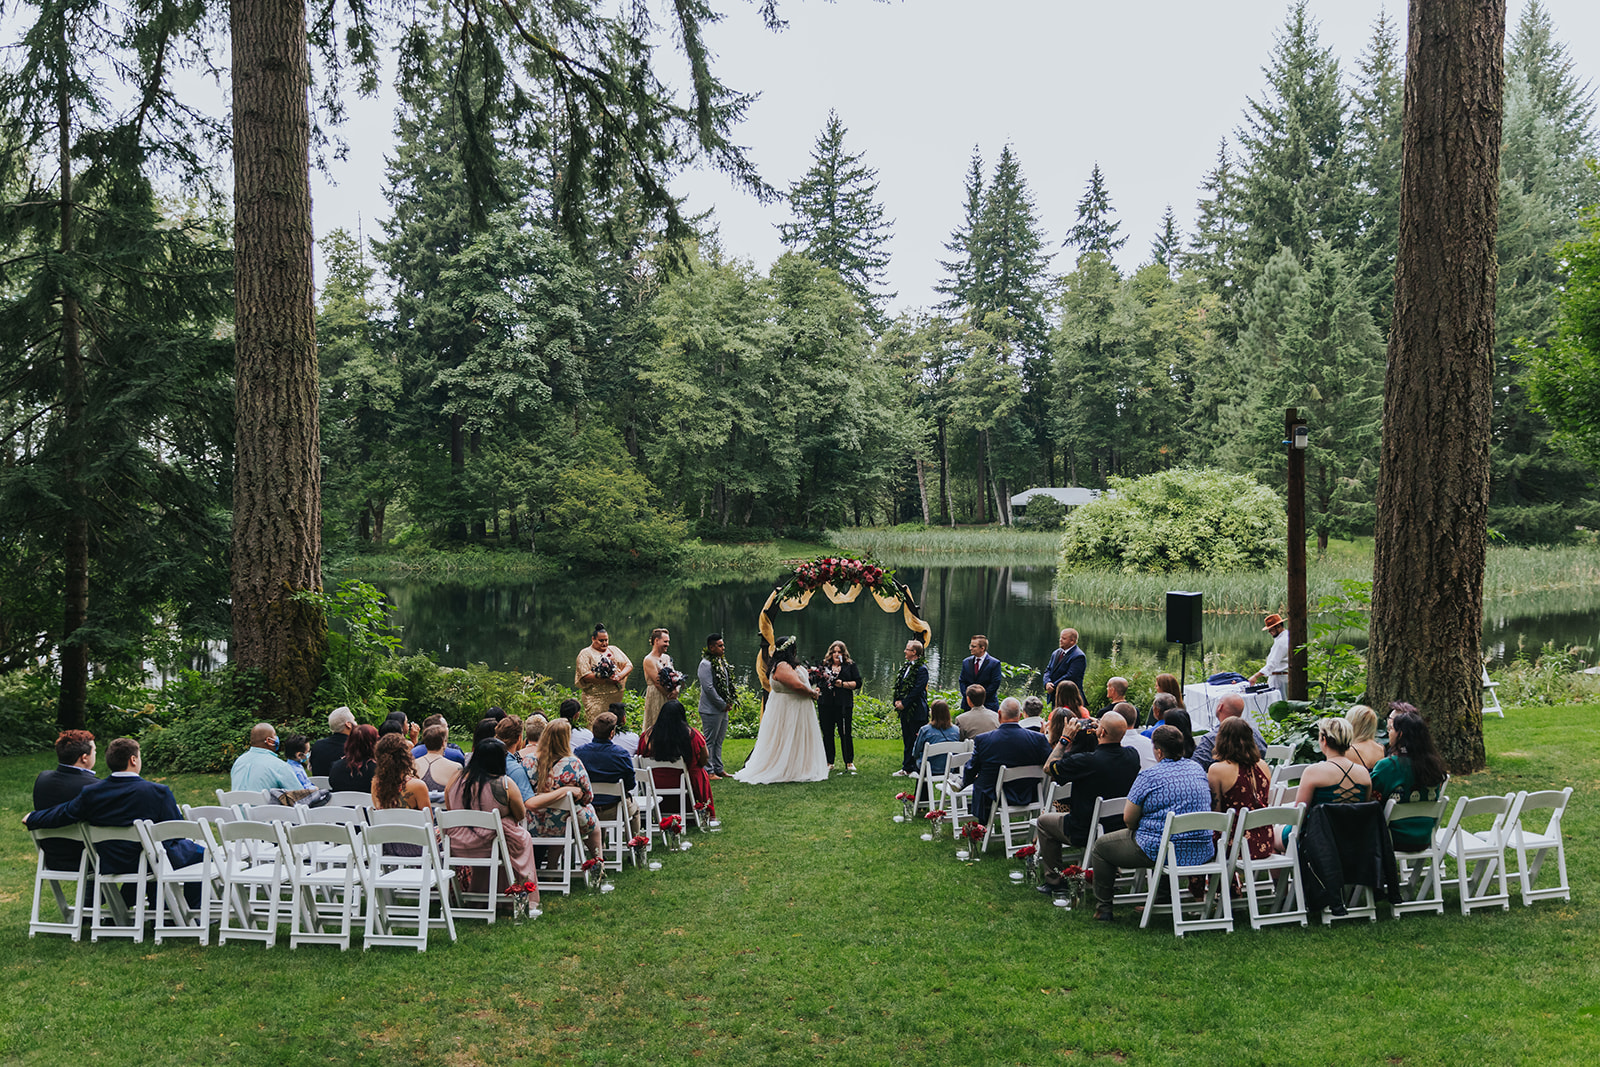 A wedding ceremony in a lakeside forested wedding venue called Bridal Veil Lakes.